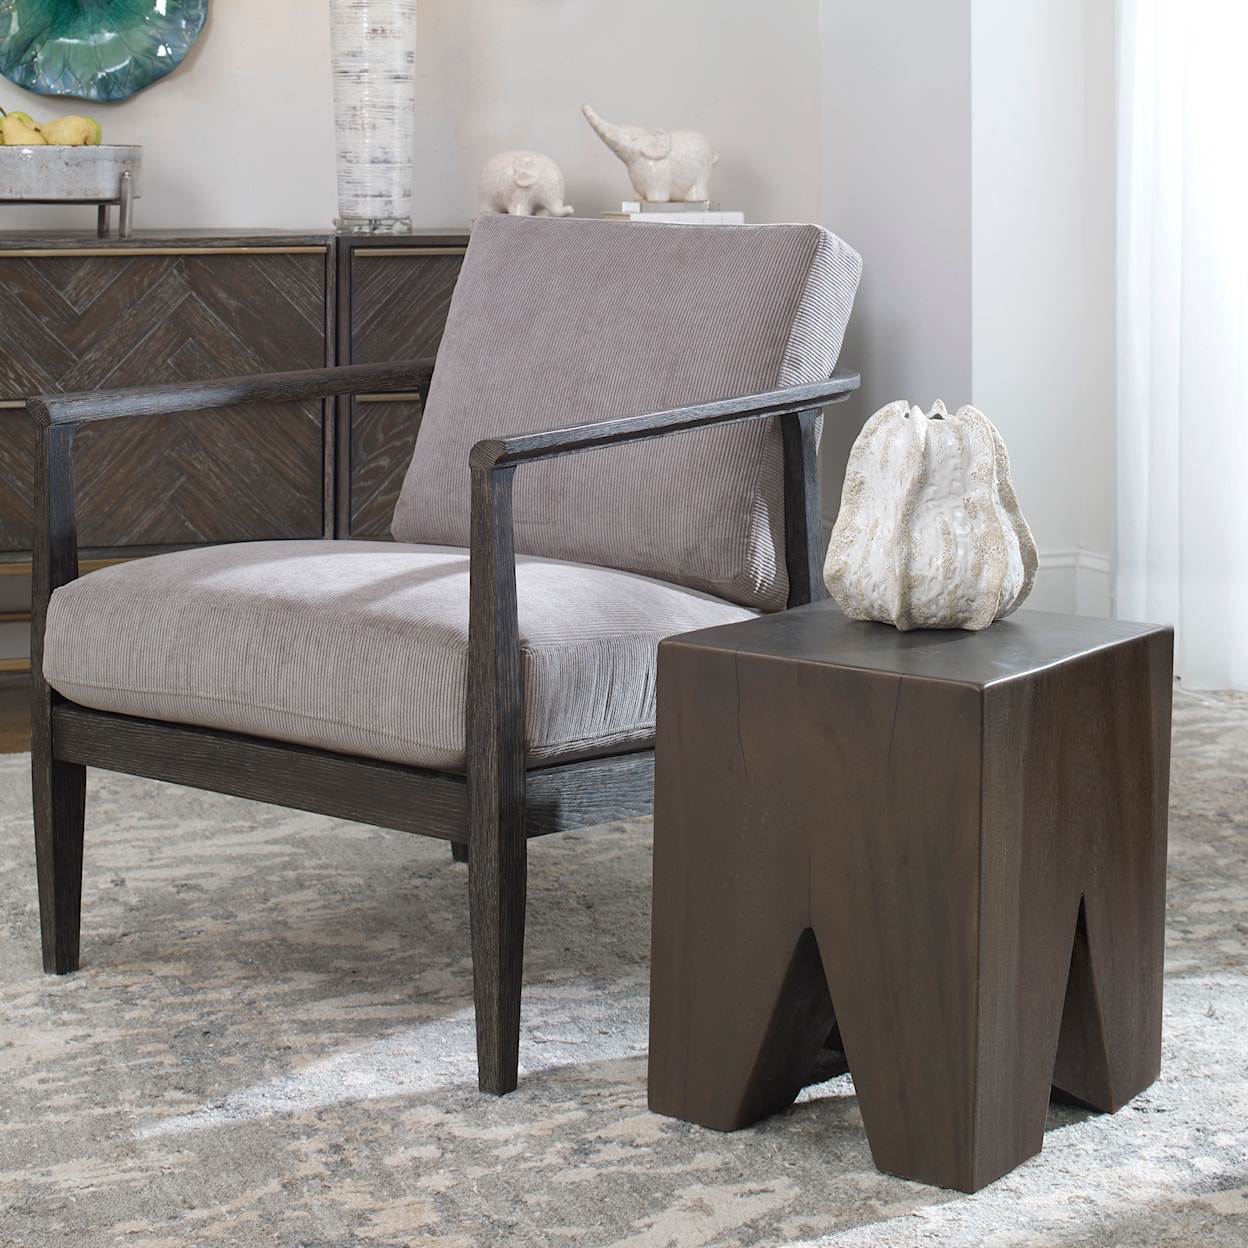 Uttermost Armin Armin Solid Wood Accent Stool